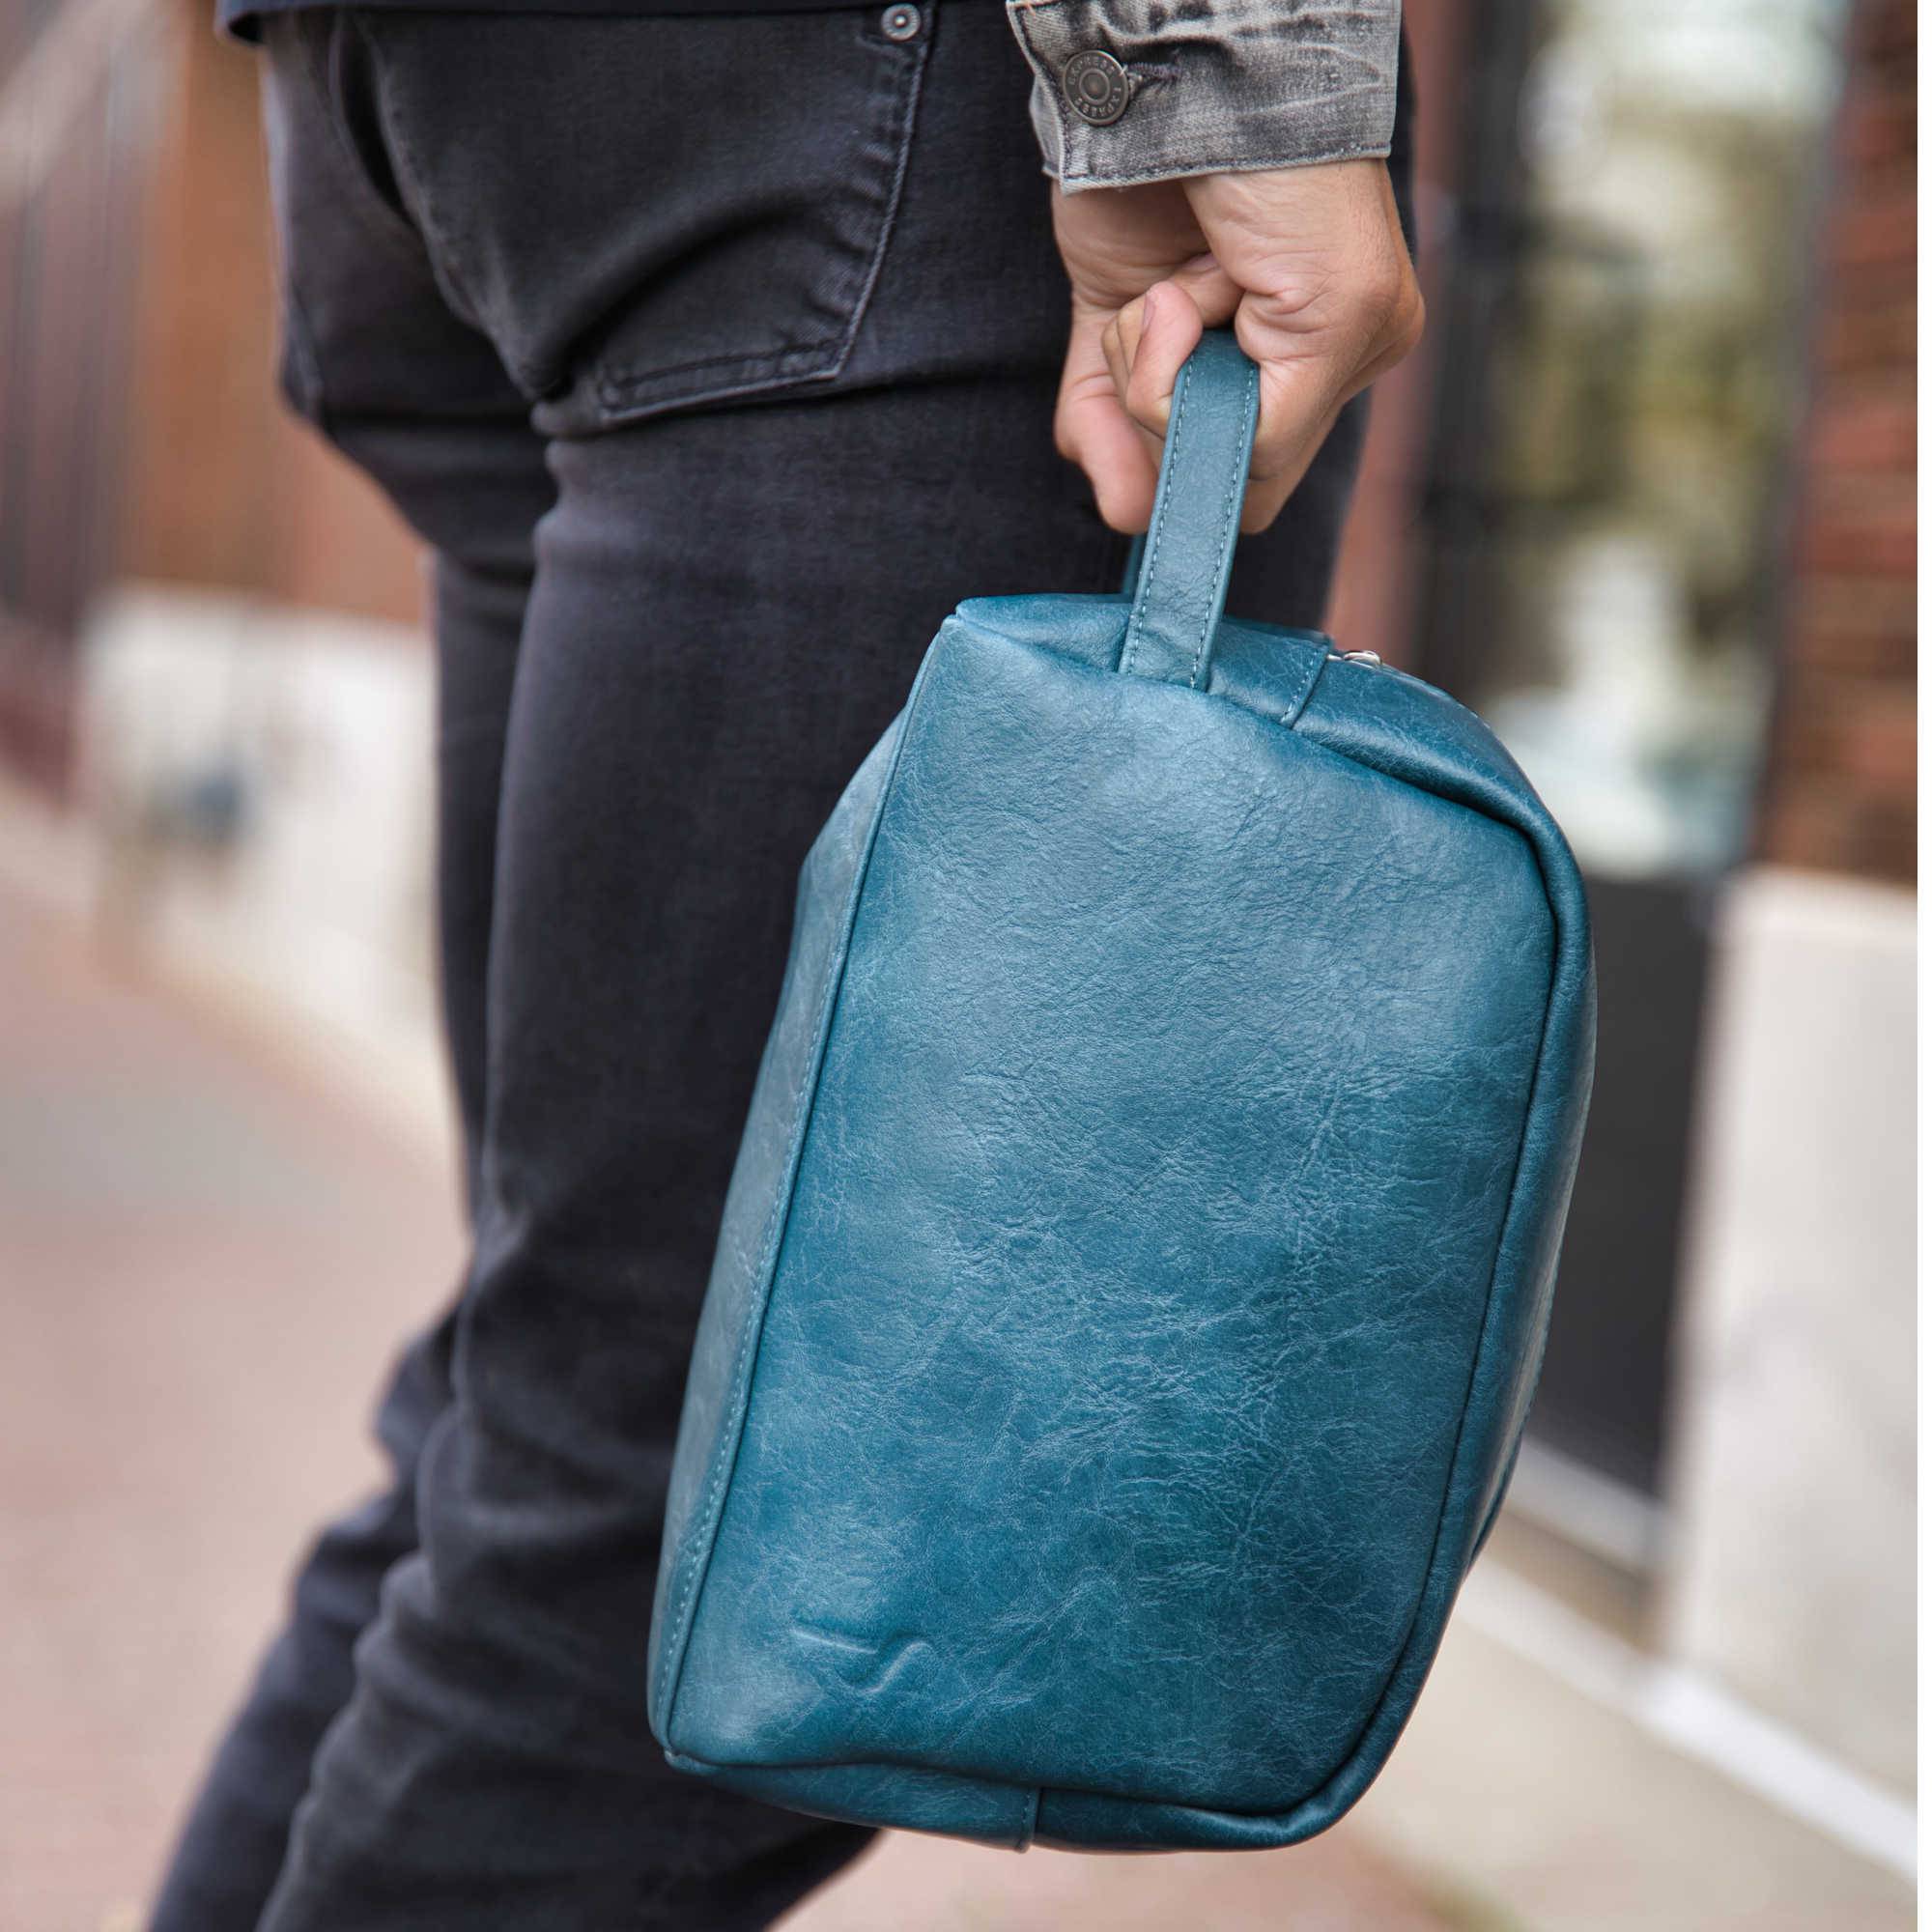 Blue Leather Toiletry Bag - Sole Premise